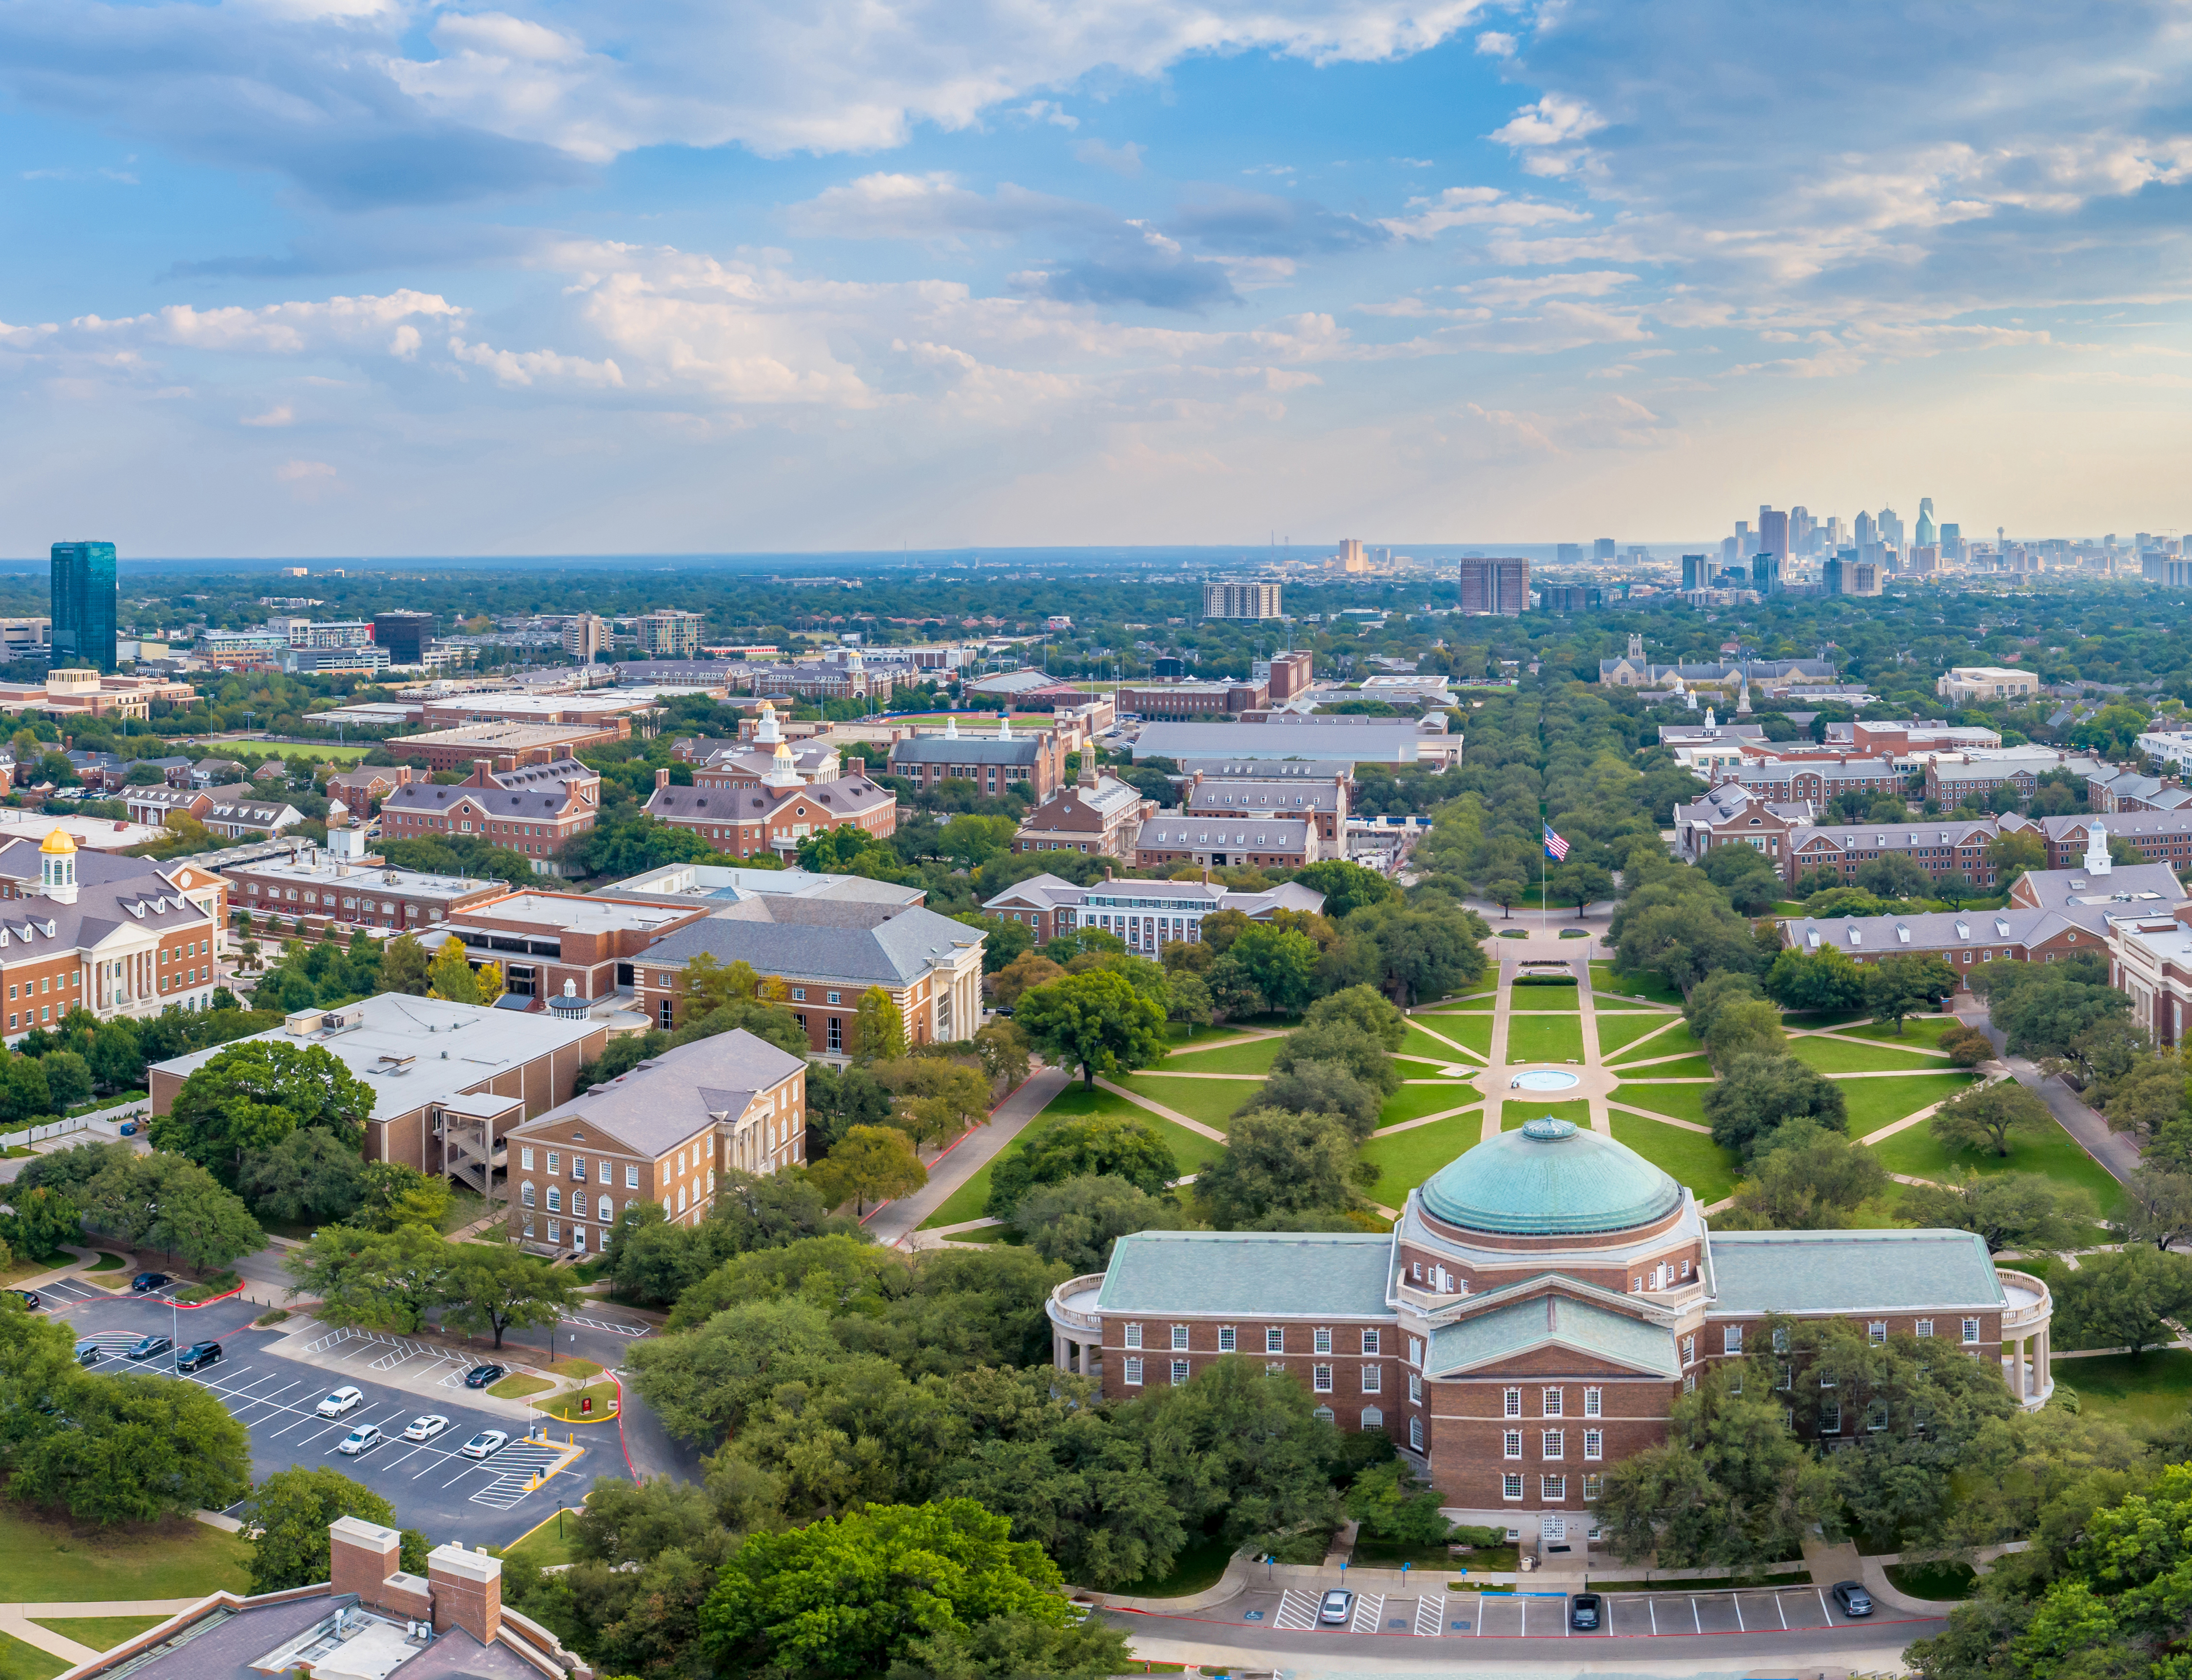 SMU Campus looking south, with Dallas in Distance